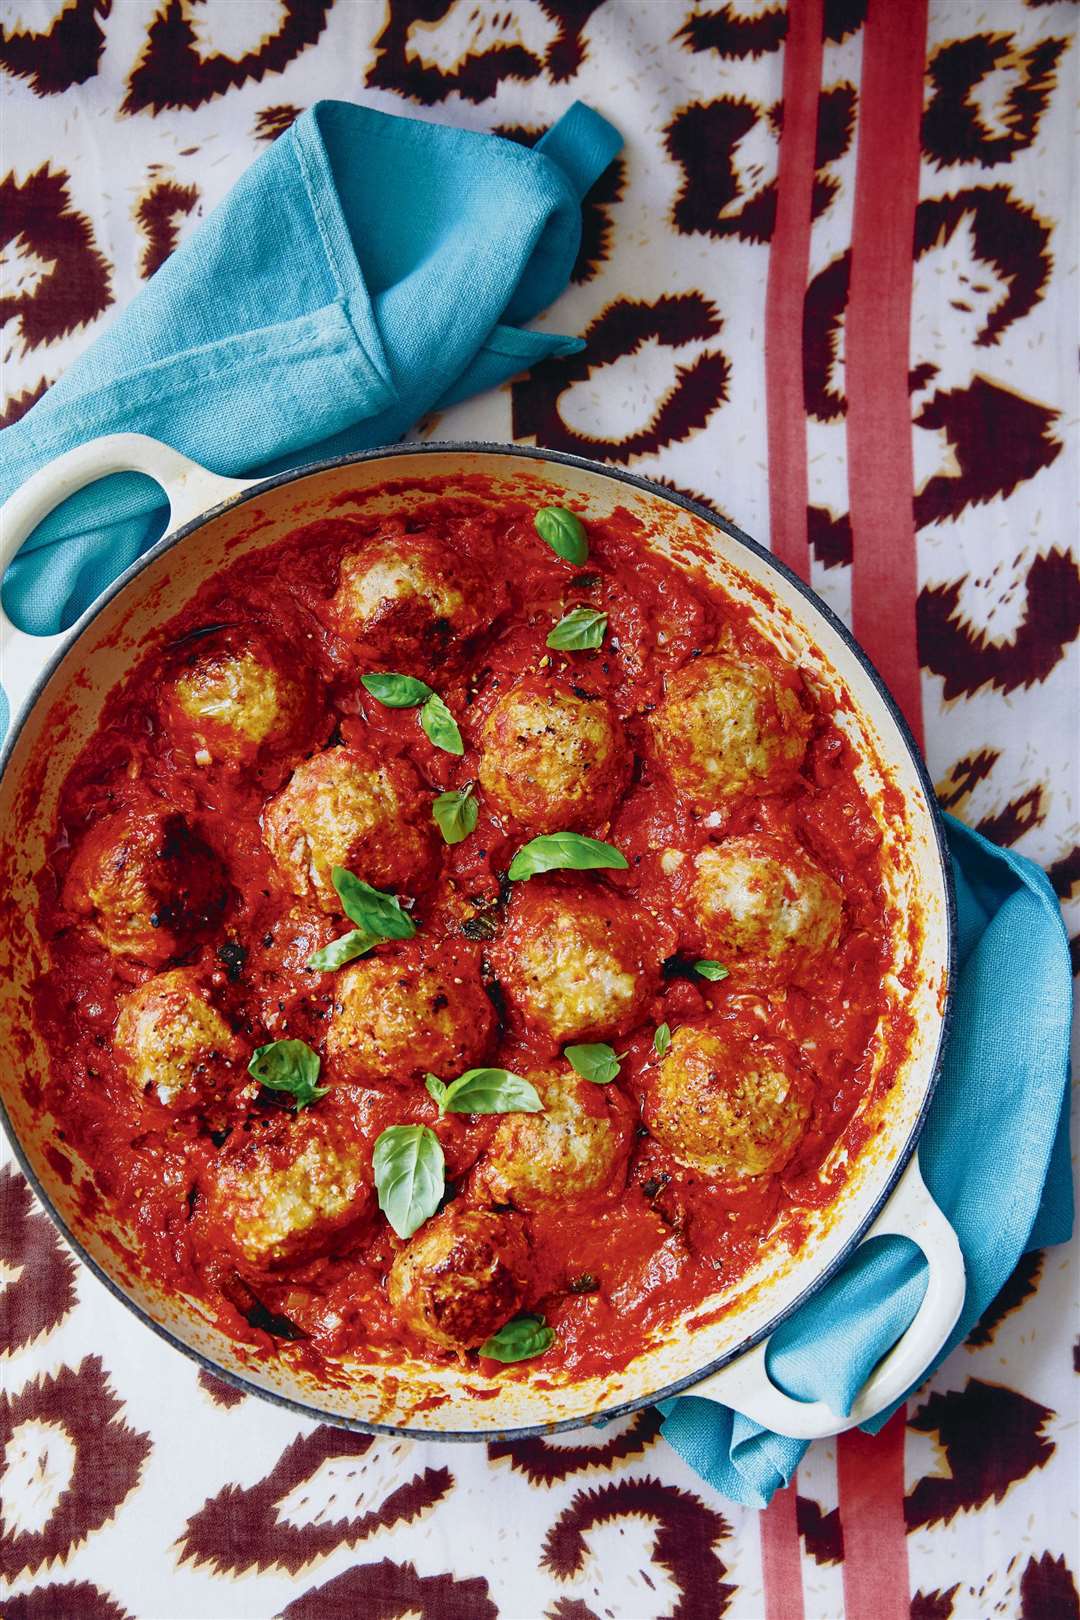 Turkey meatballs from Table Manners: The Cookbook by Jessie and Lennie Ware (Ebury Press, £22). Picture: Ola O Smit/PA